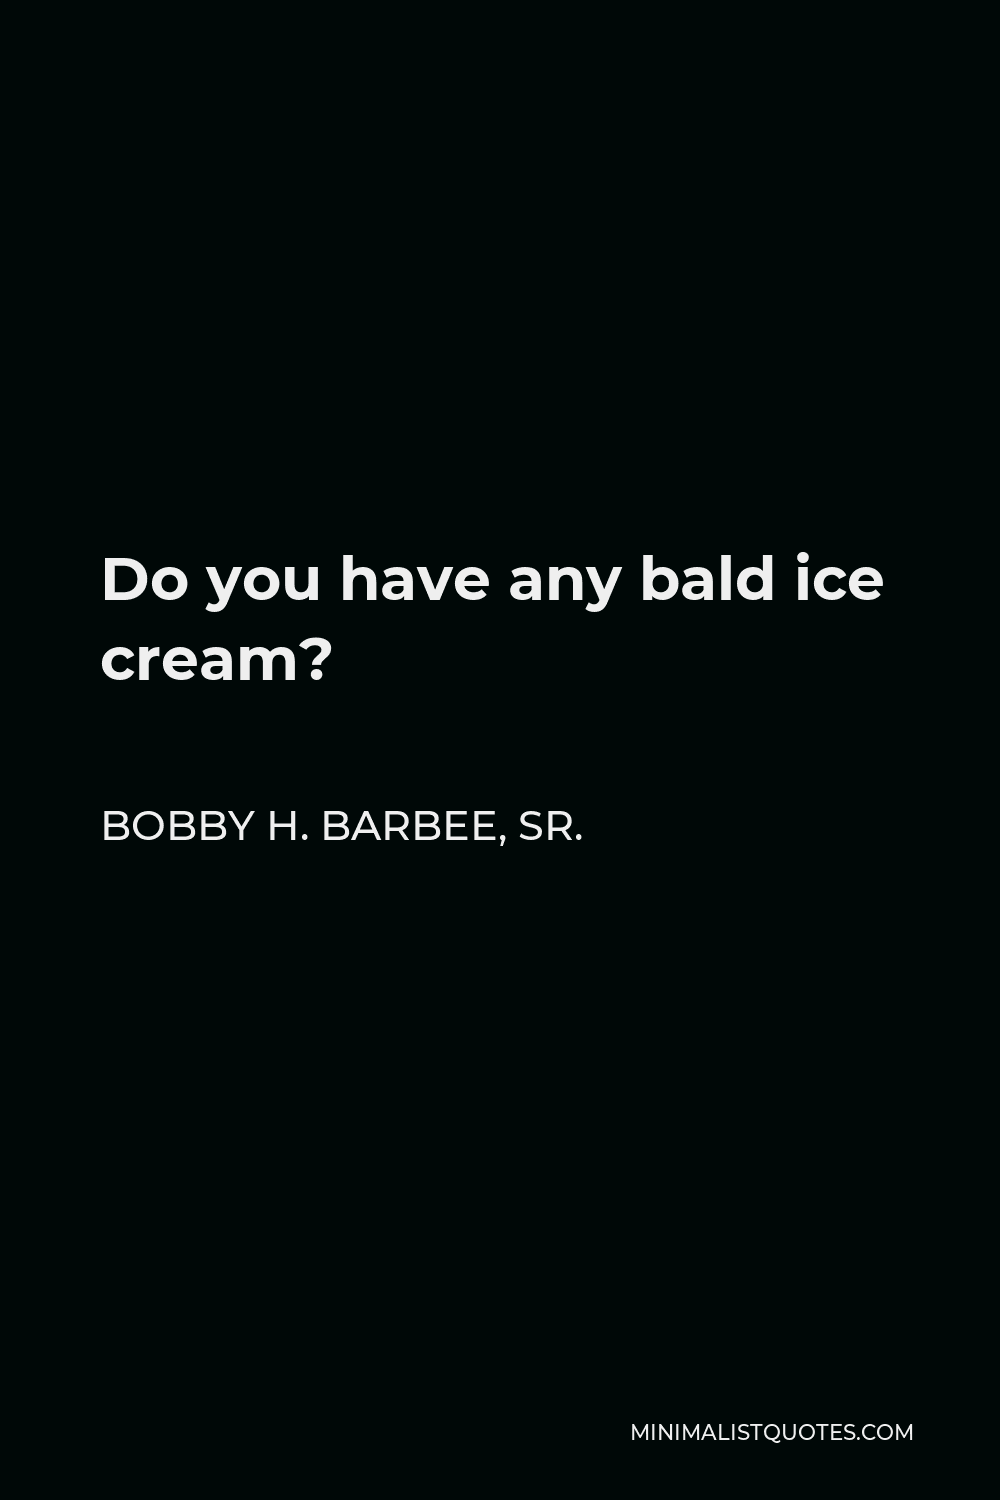 Bobby H. Barbee, Sr. Quote - Do you have any bald ice cream?